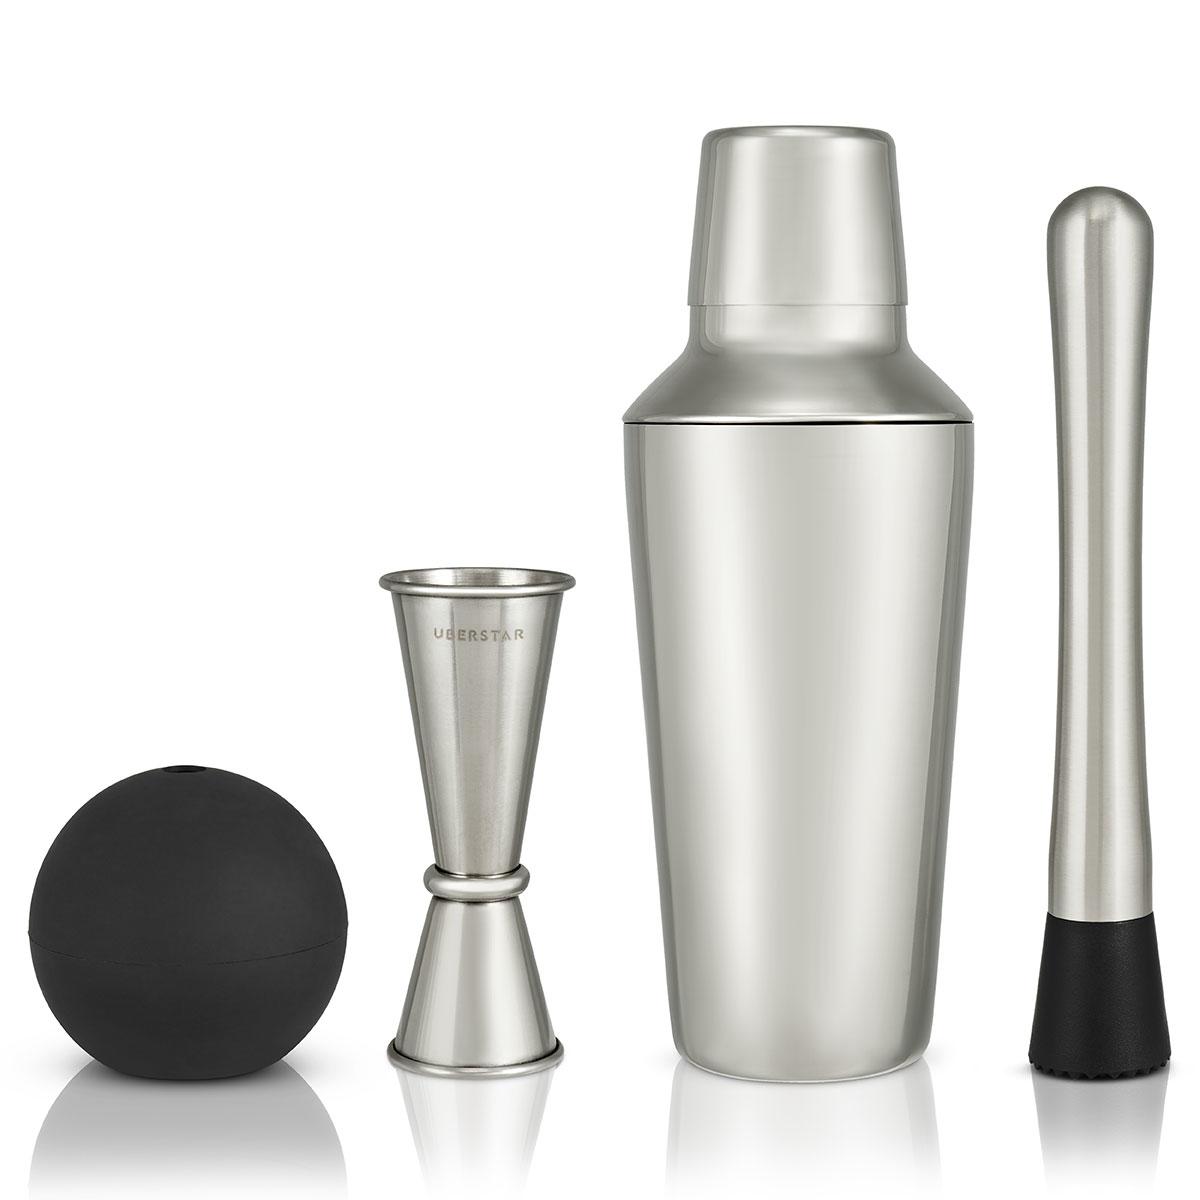 Cocktail Master Gift Set - Silver